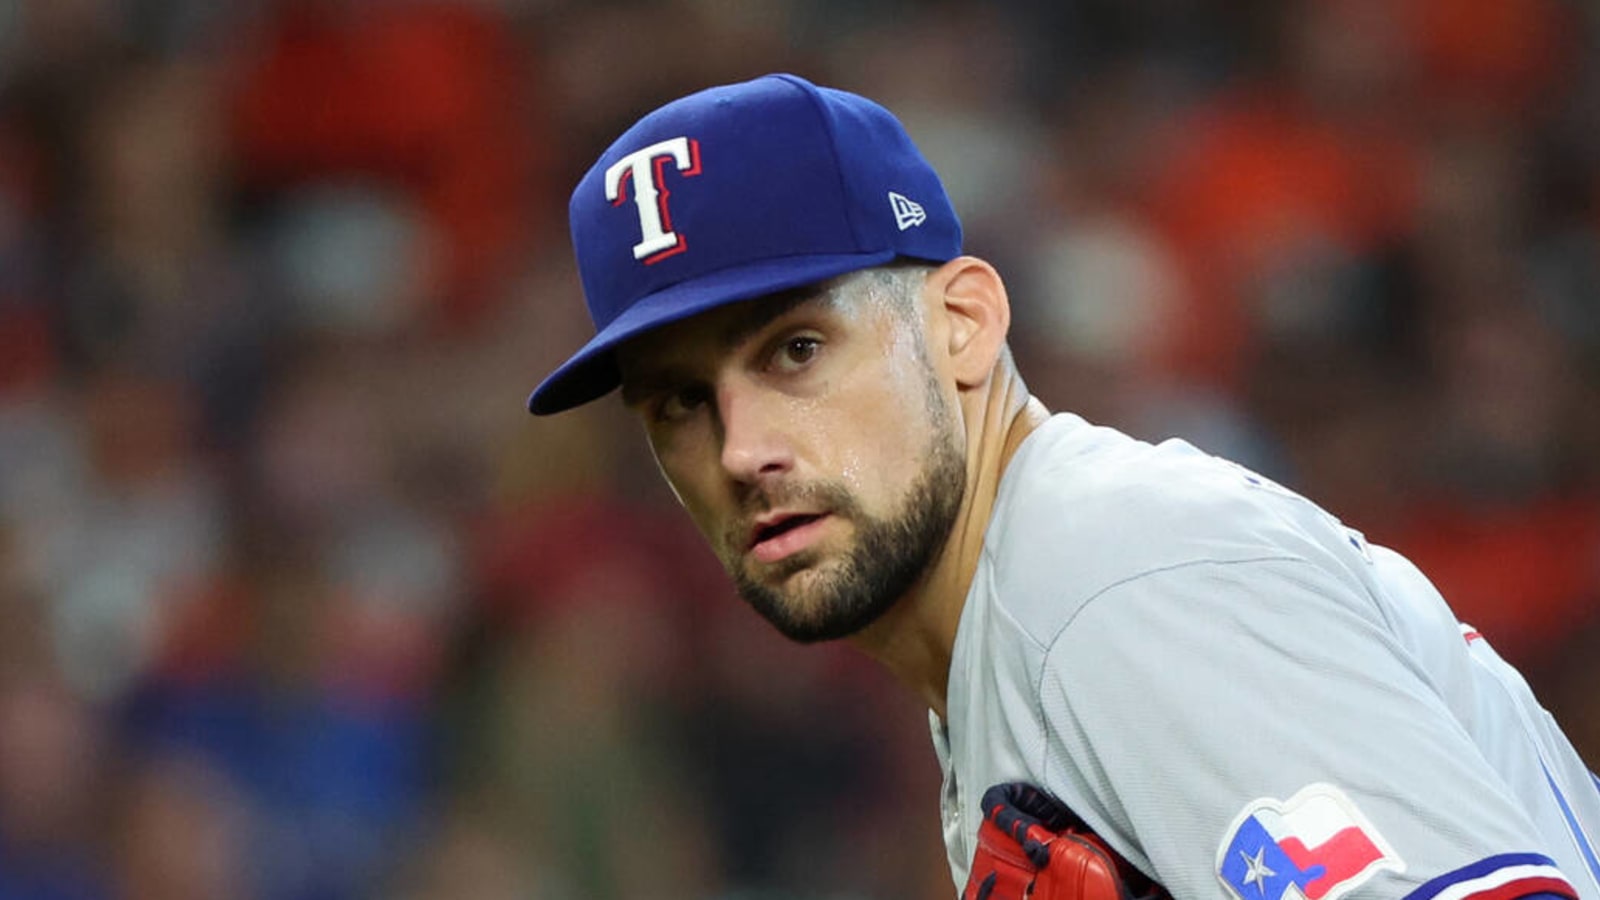 Rangers join rare company with Game 2 ALCS win over Astros